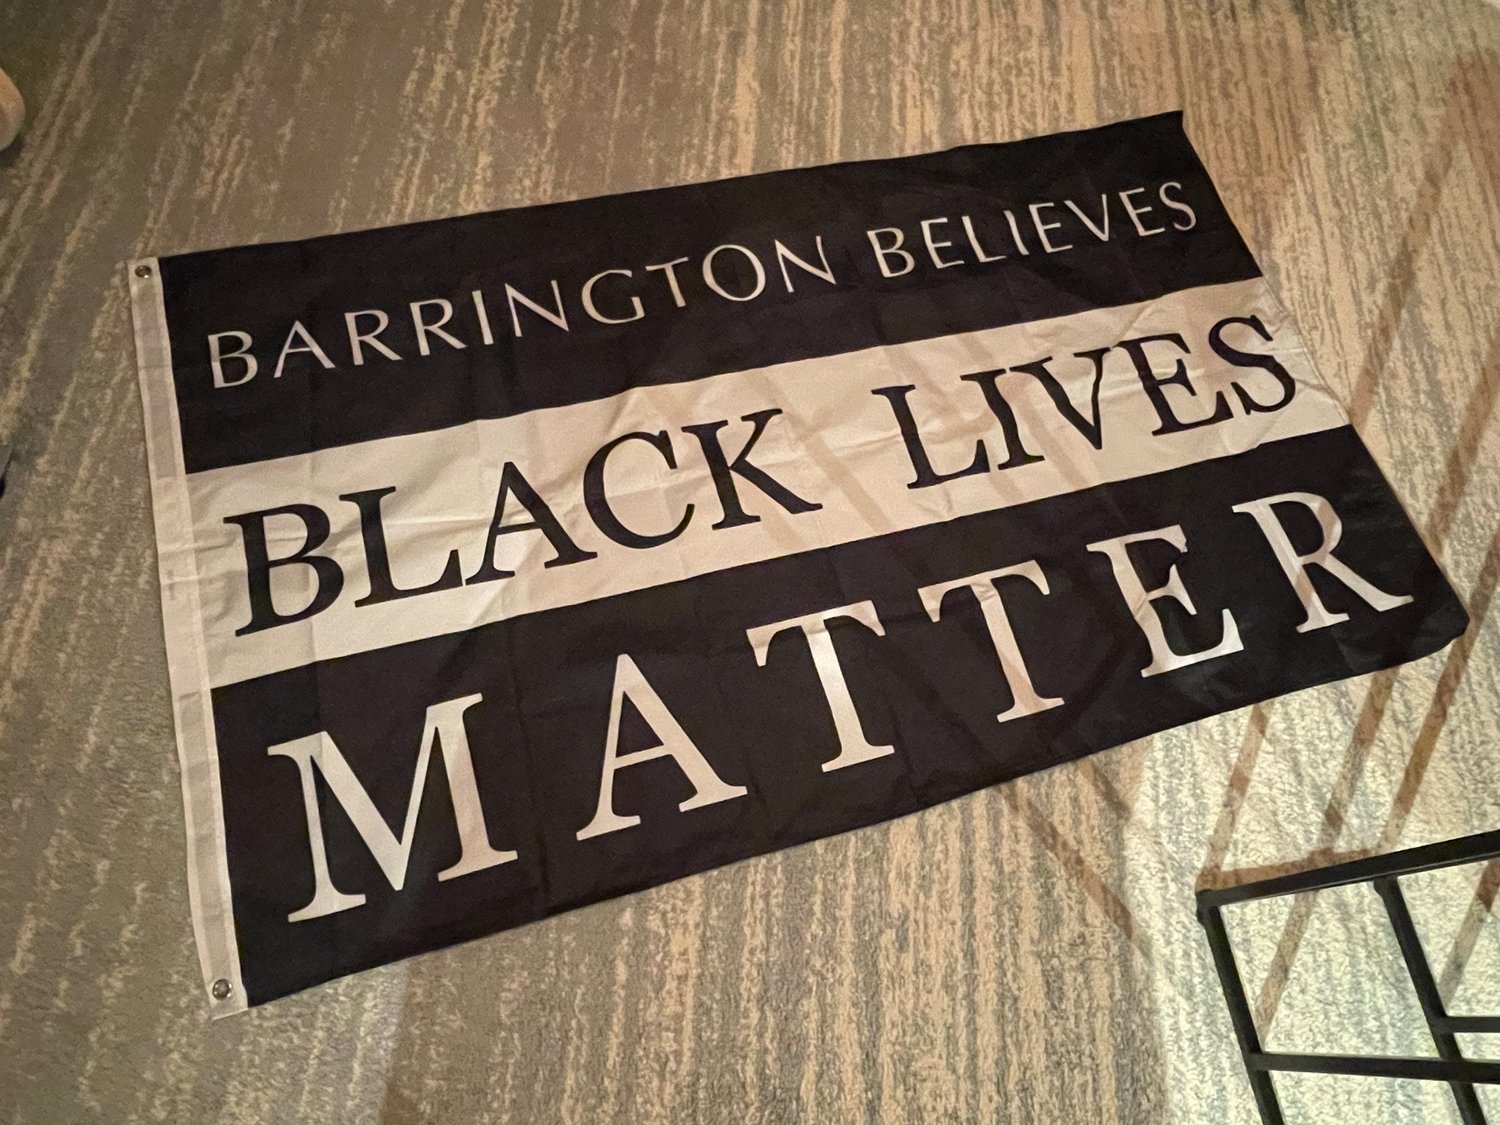 Barrington Town Council member Jacob Brier made this flag, which carries the message “Barrington Believes Black Lives Matter. It is flying outside Barrington Town Hall for the month of February.